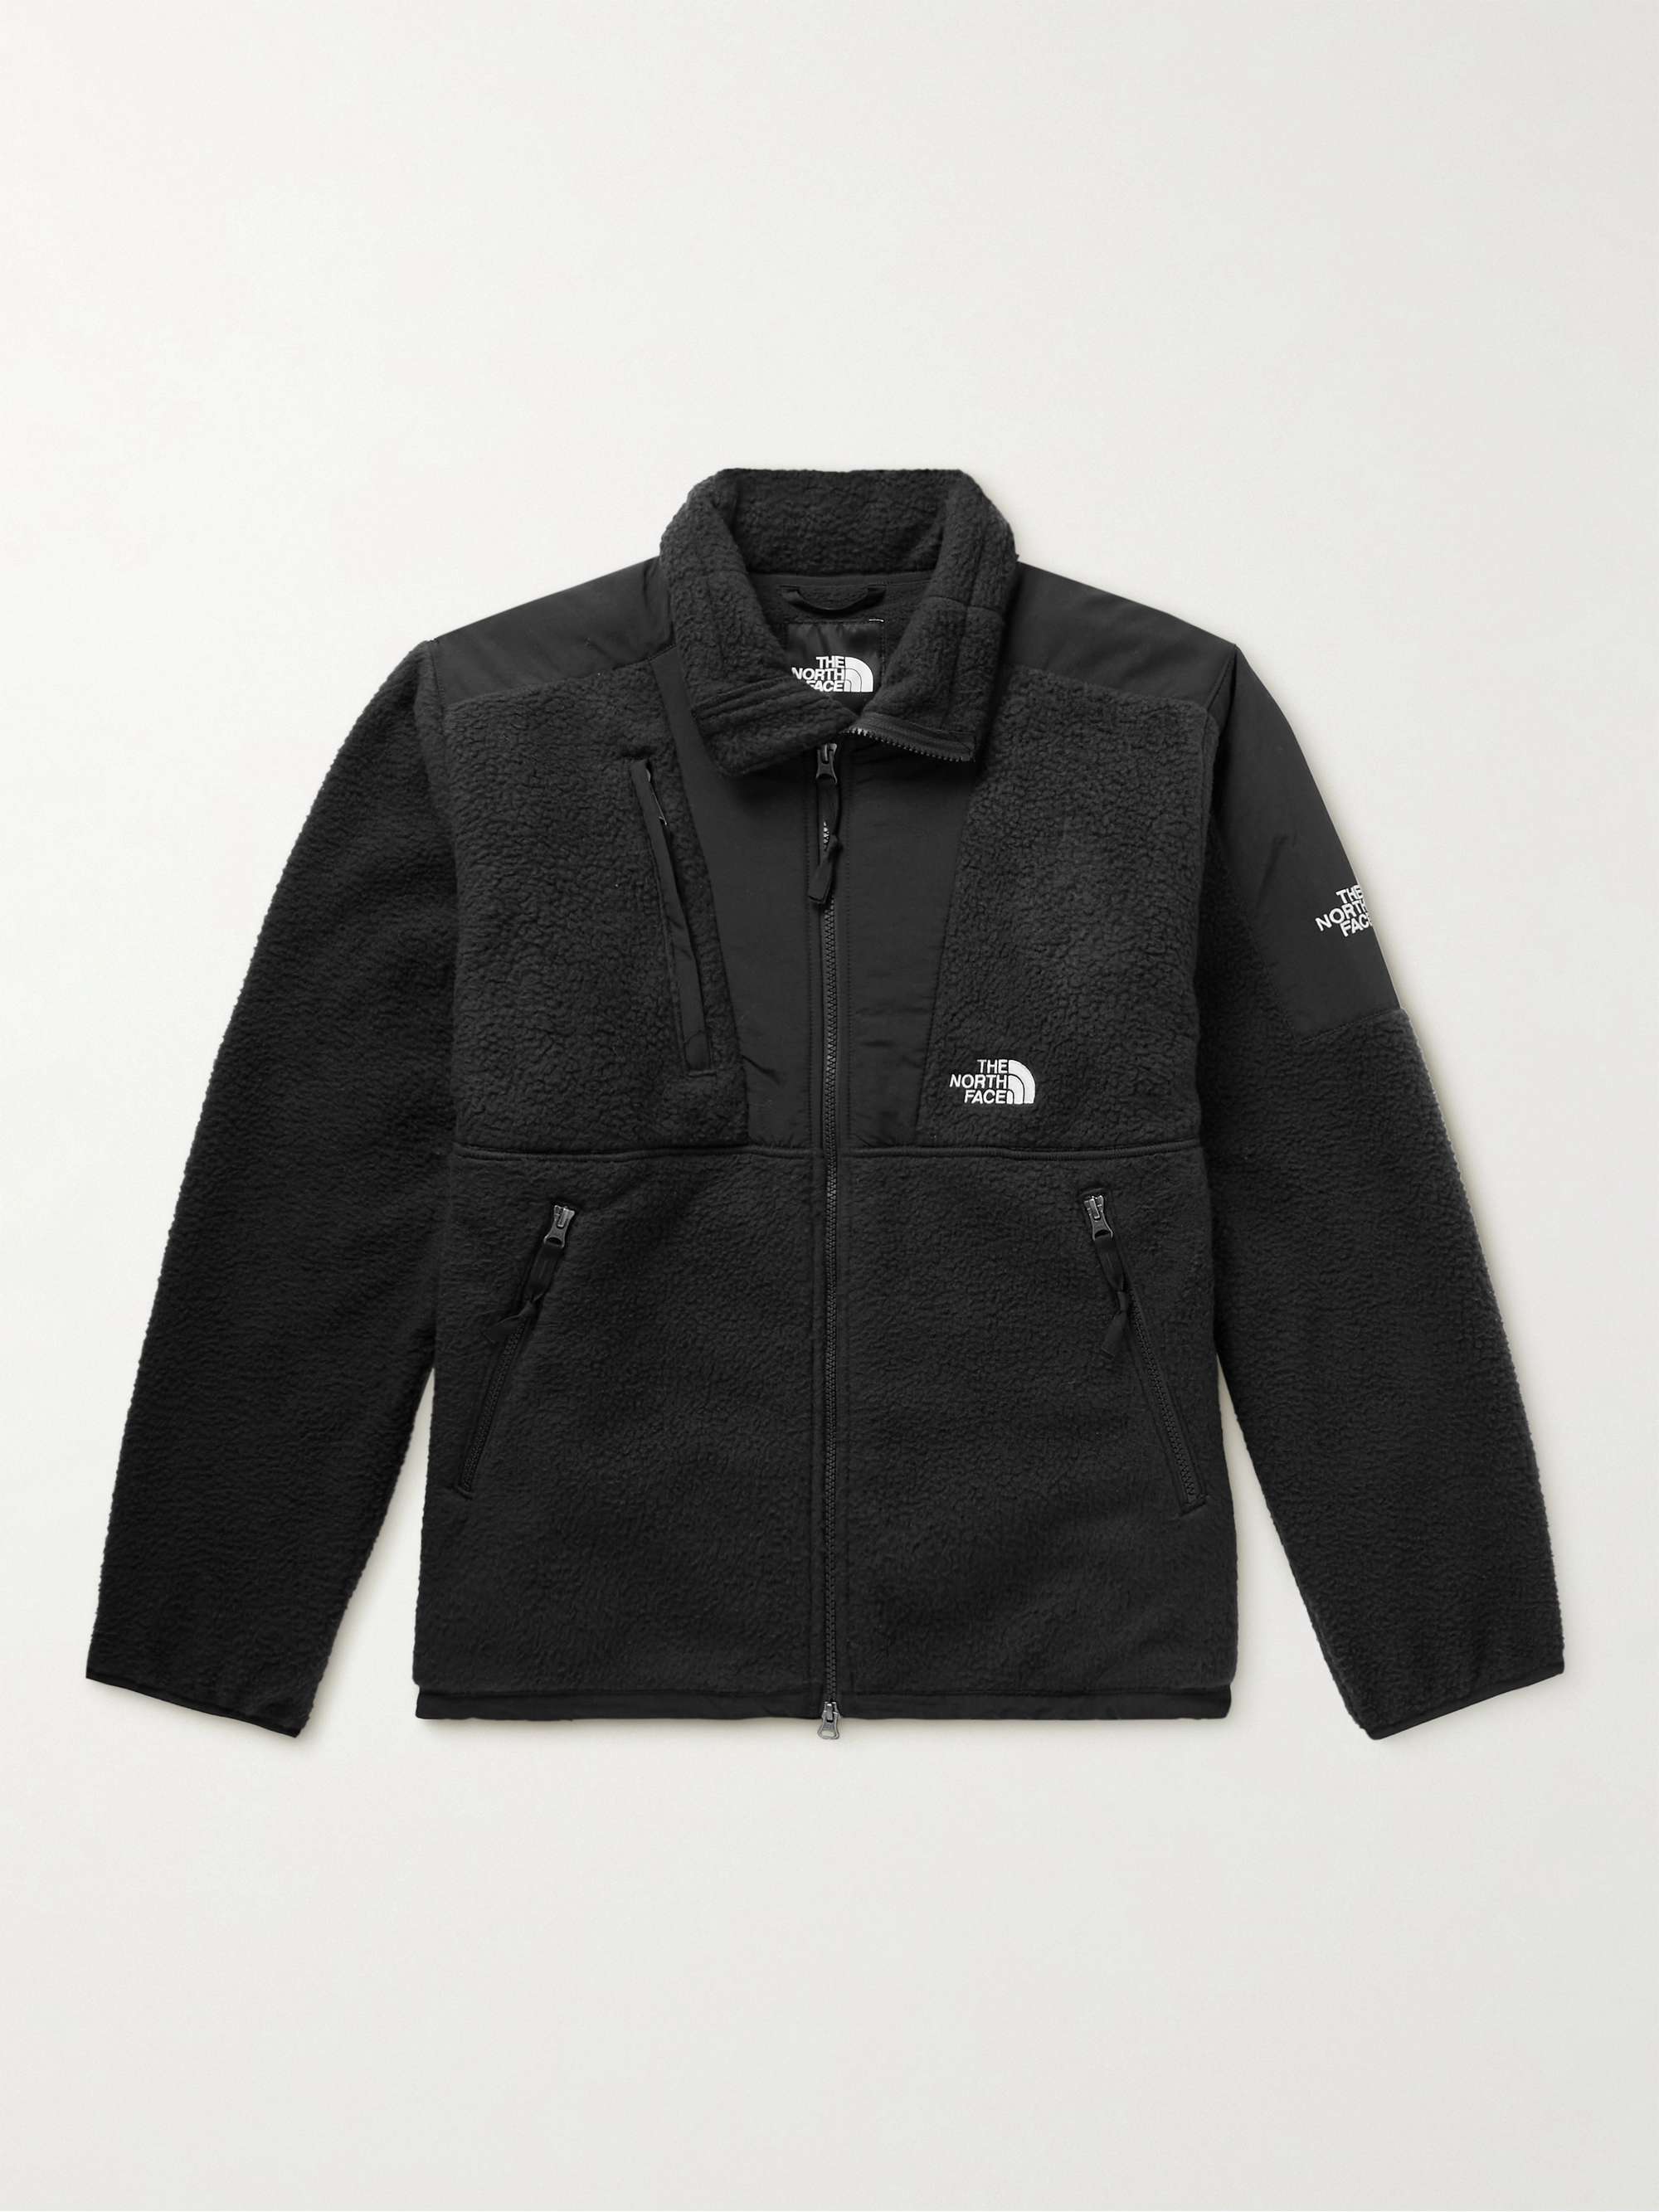 THE NORTH FACE Denali 94 Recycled Shell and Fleece Jacket